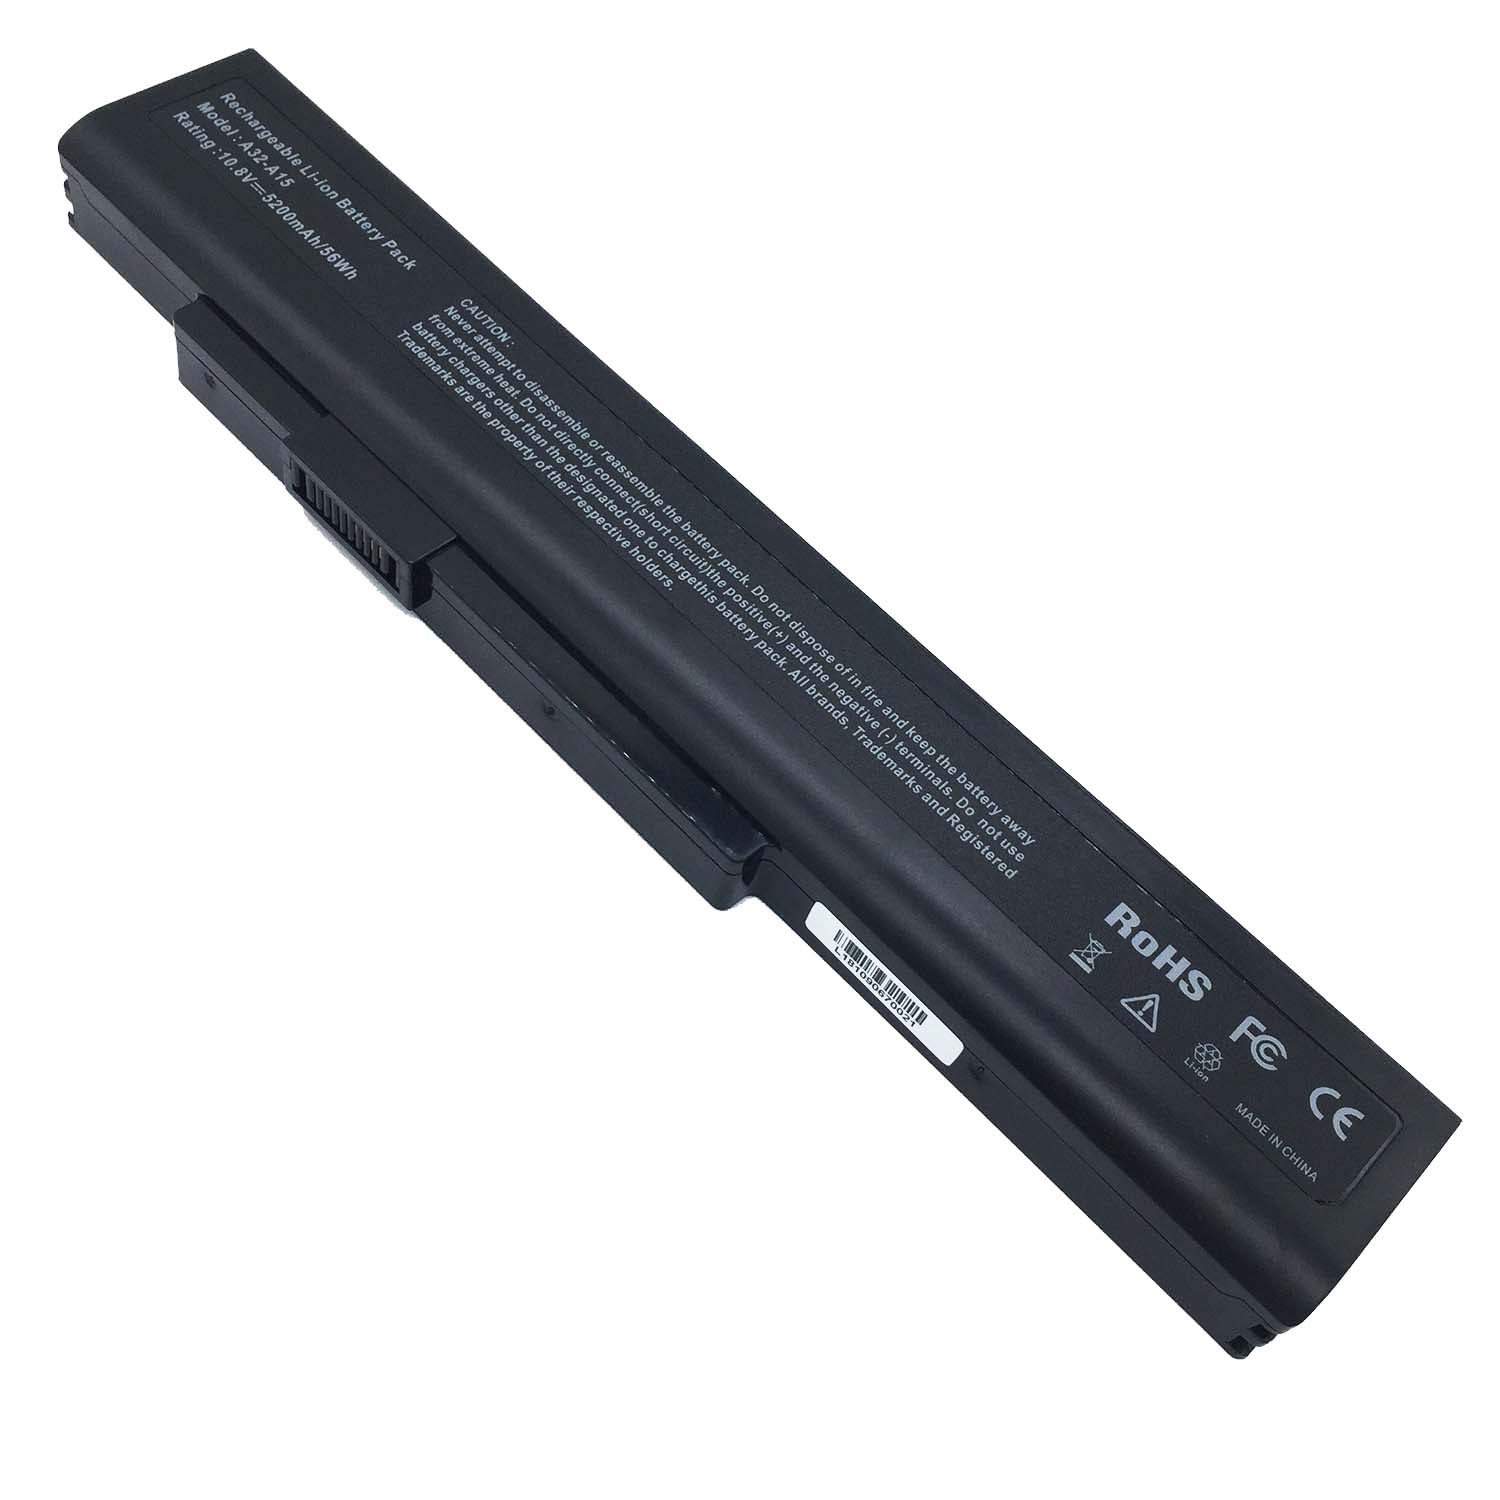 Replacement Battery for Medion Medion Akoya P7815 battery